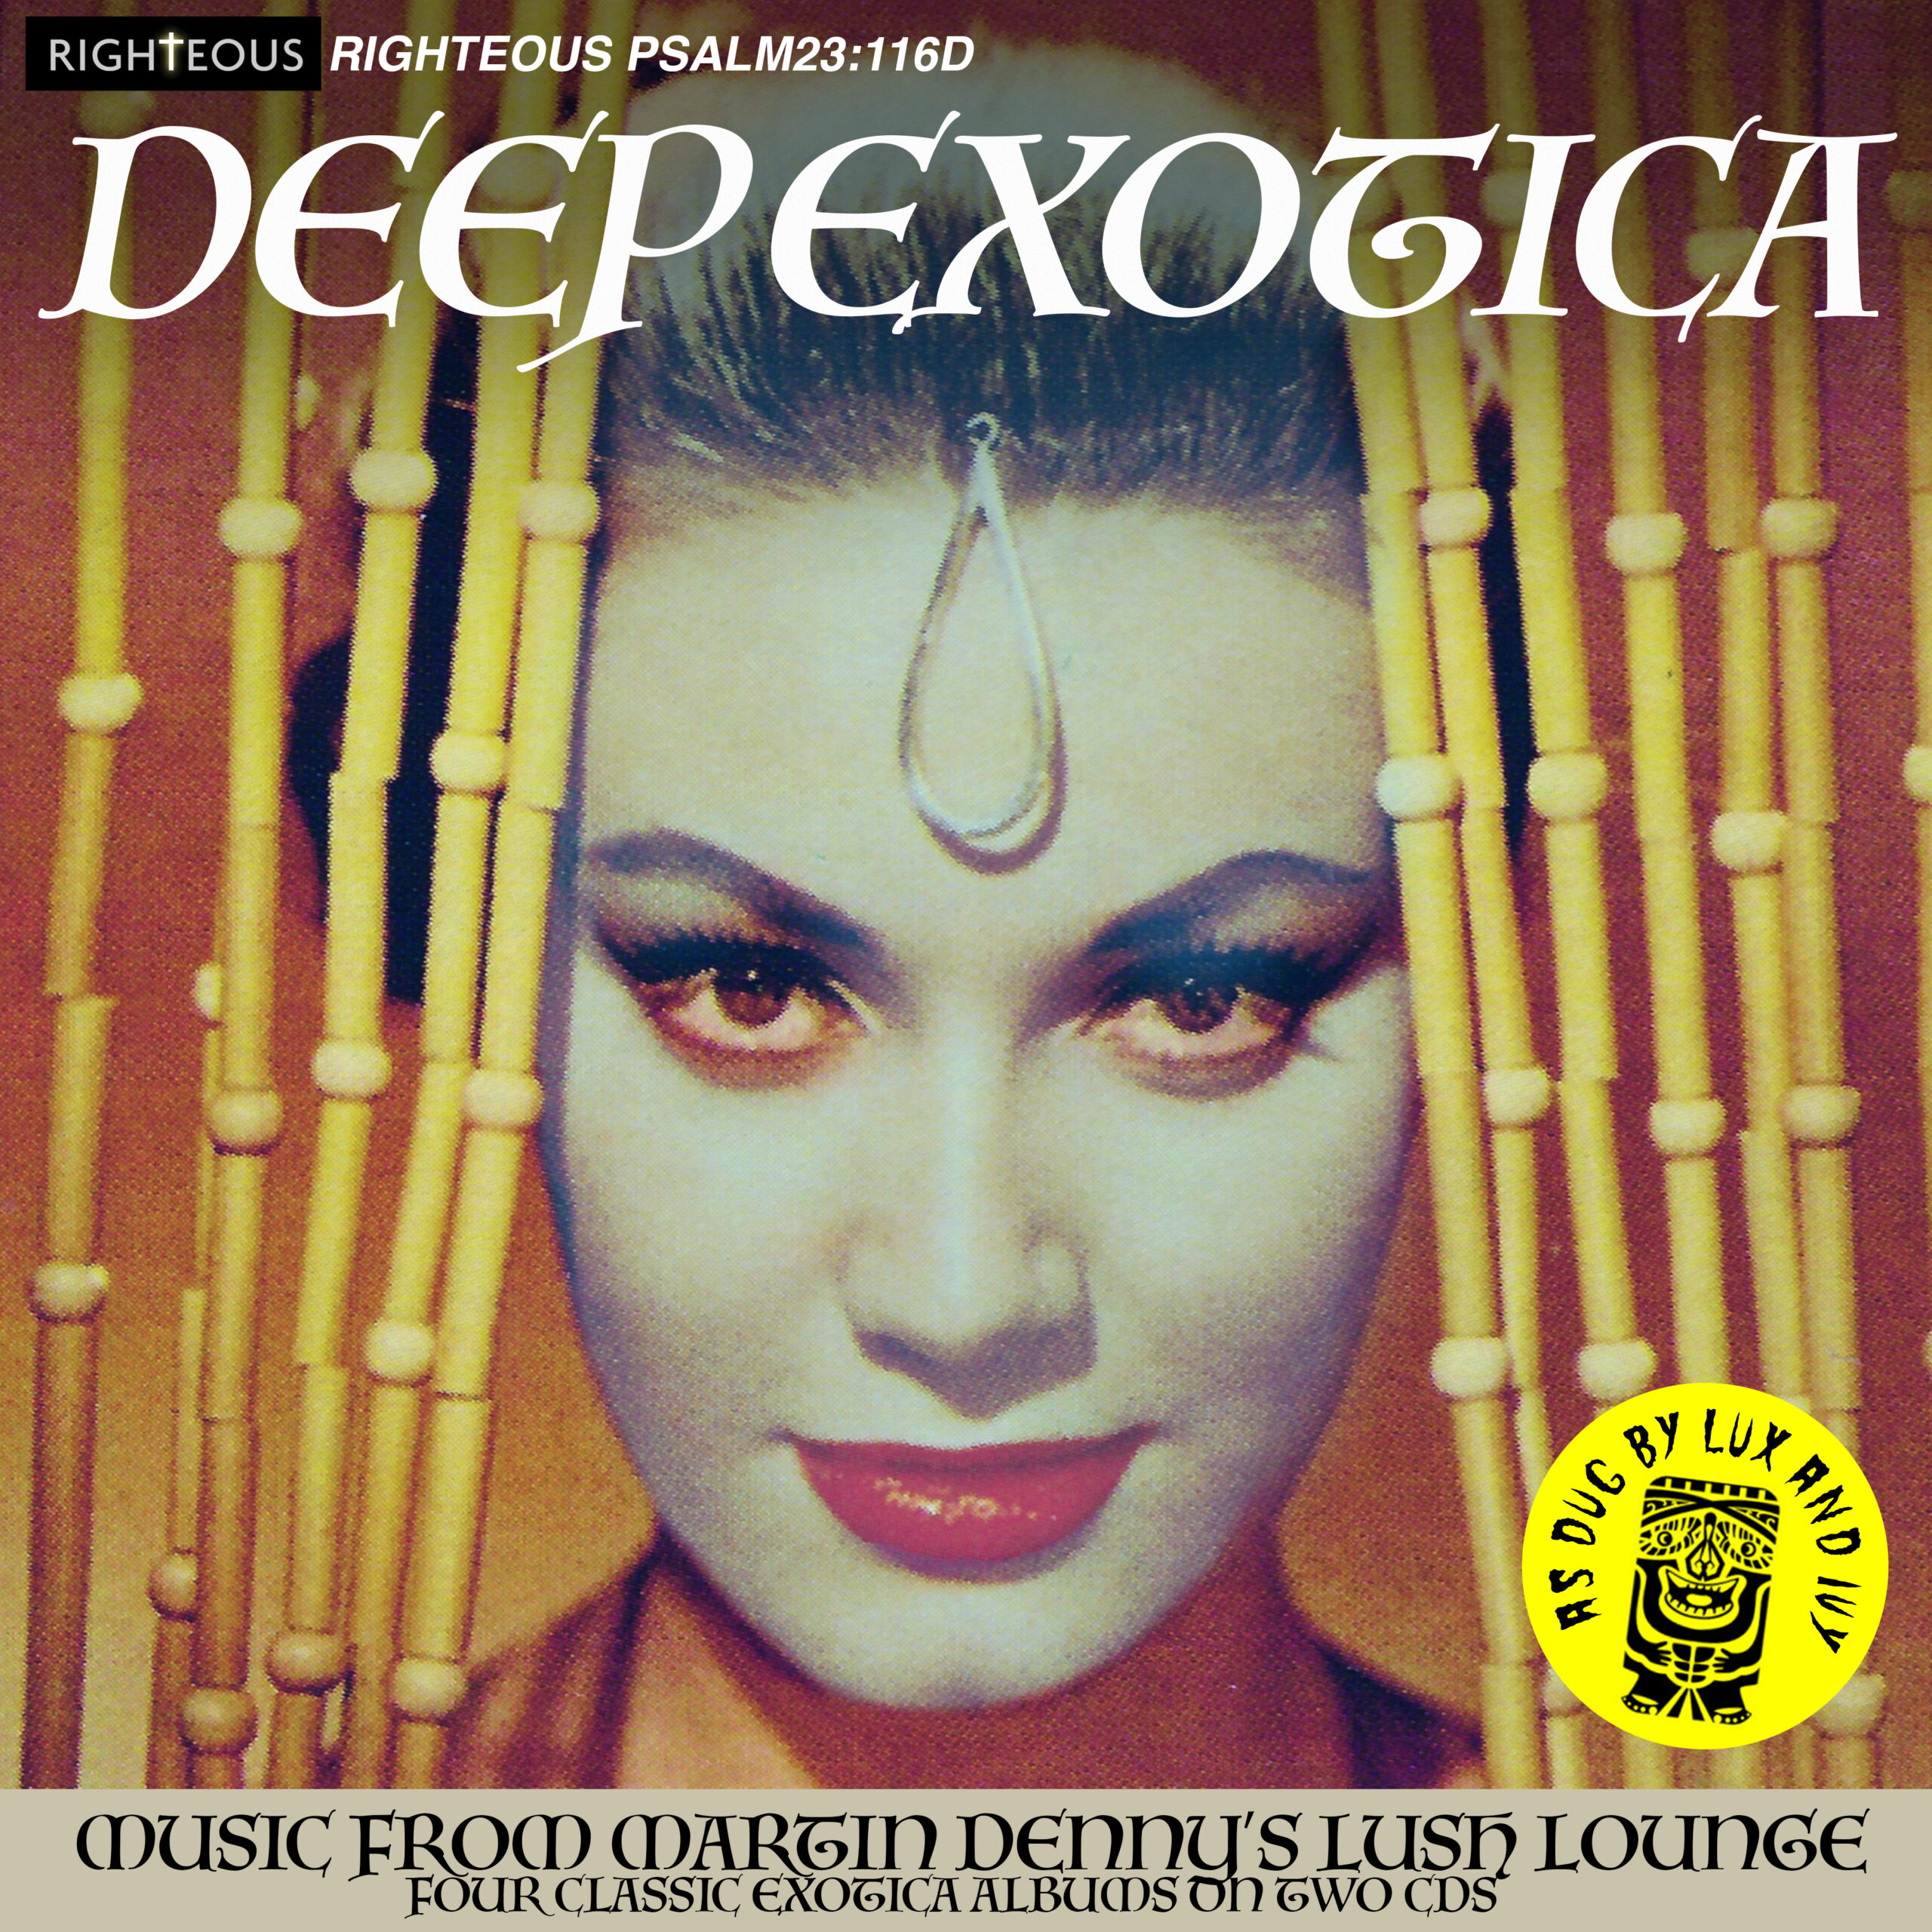 Martin Denny – Deep Exotica: Music From Martin Denny’s Lush Lounge – Righteous